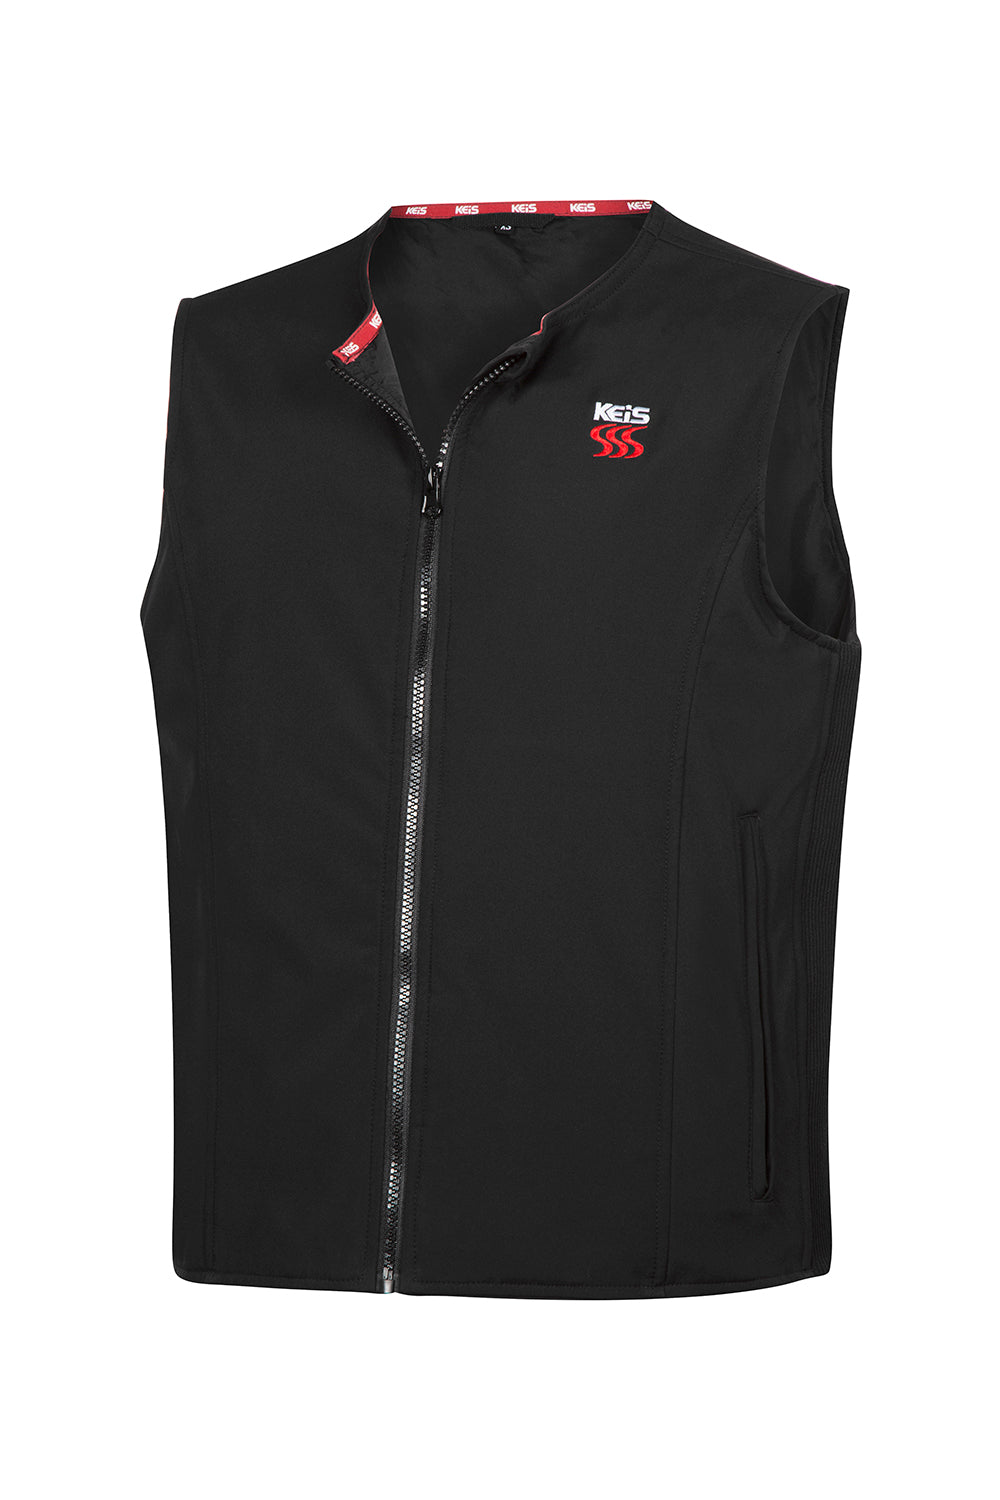 heated vest for winter warmth from Keis